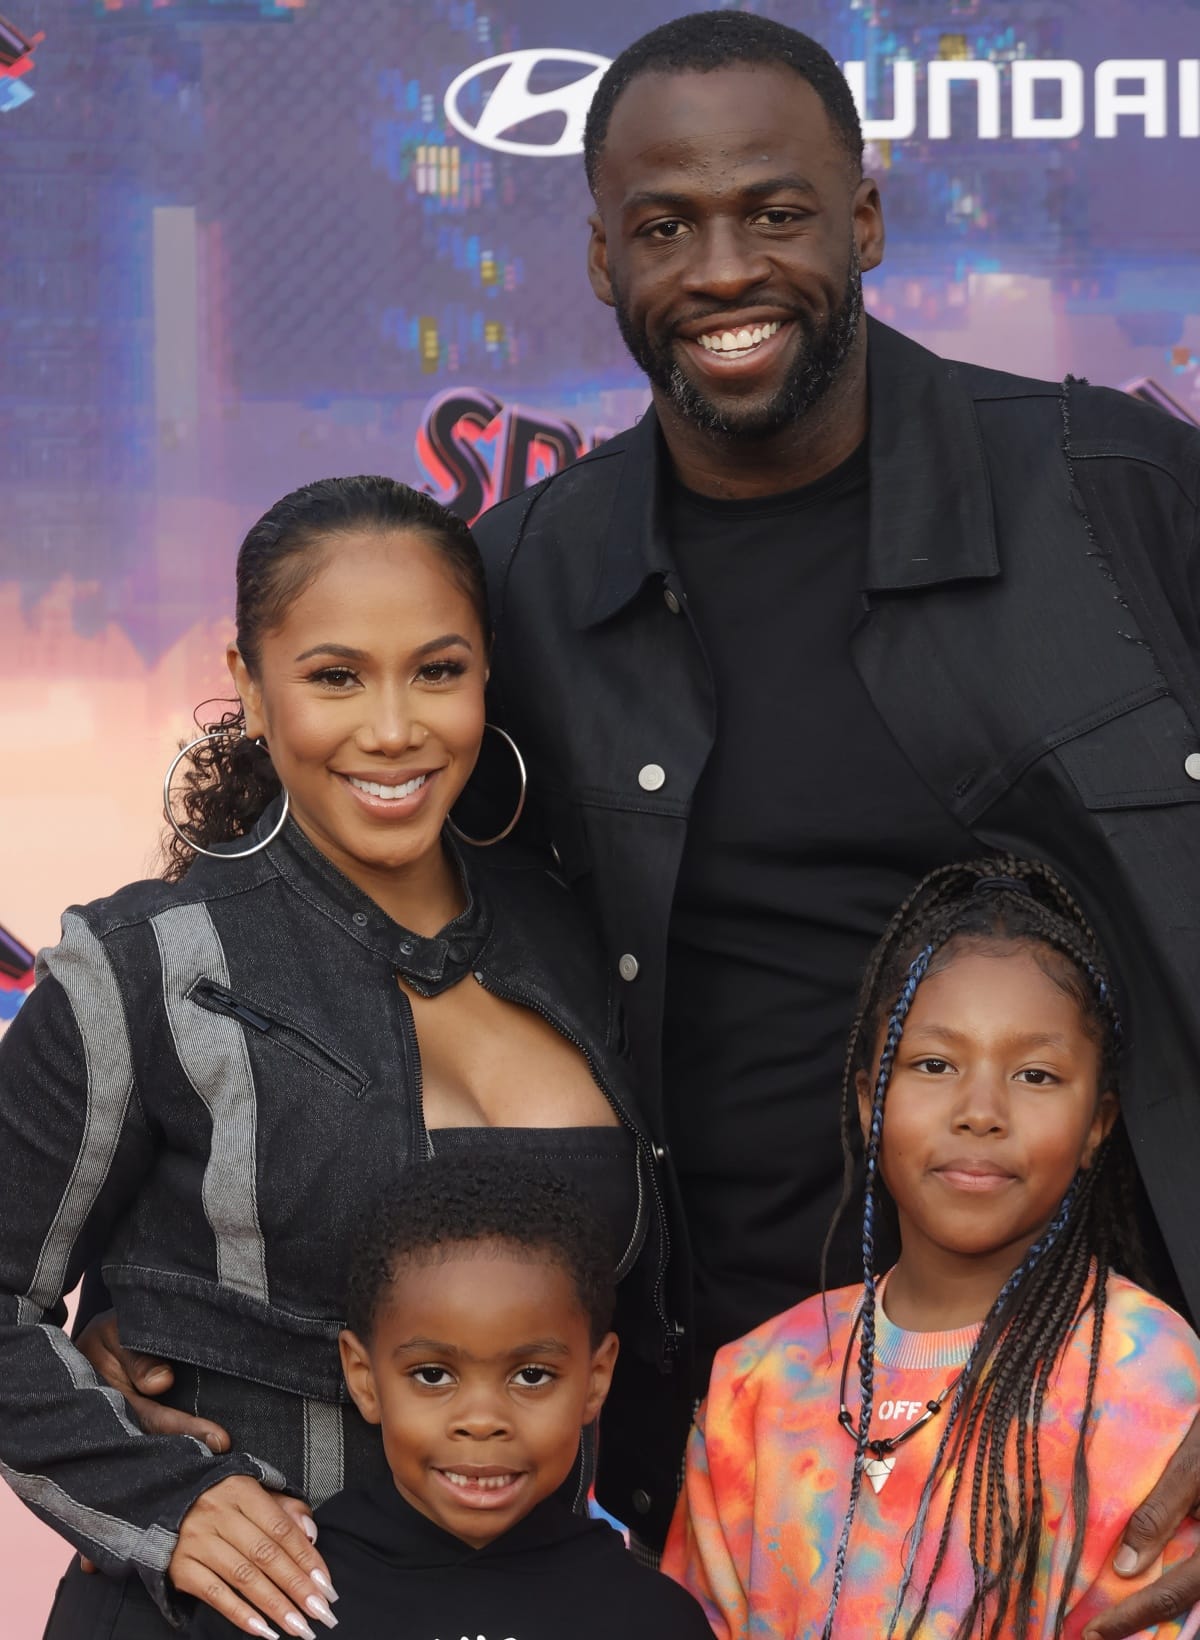 Hazel Renee and Draymond Green are proud of their kids Draymond Jamal “DJ” Green Jr., Kyla Green, Cash Green (not pictured), and Olive Jay (not pictured), who make up their beautiful blended family